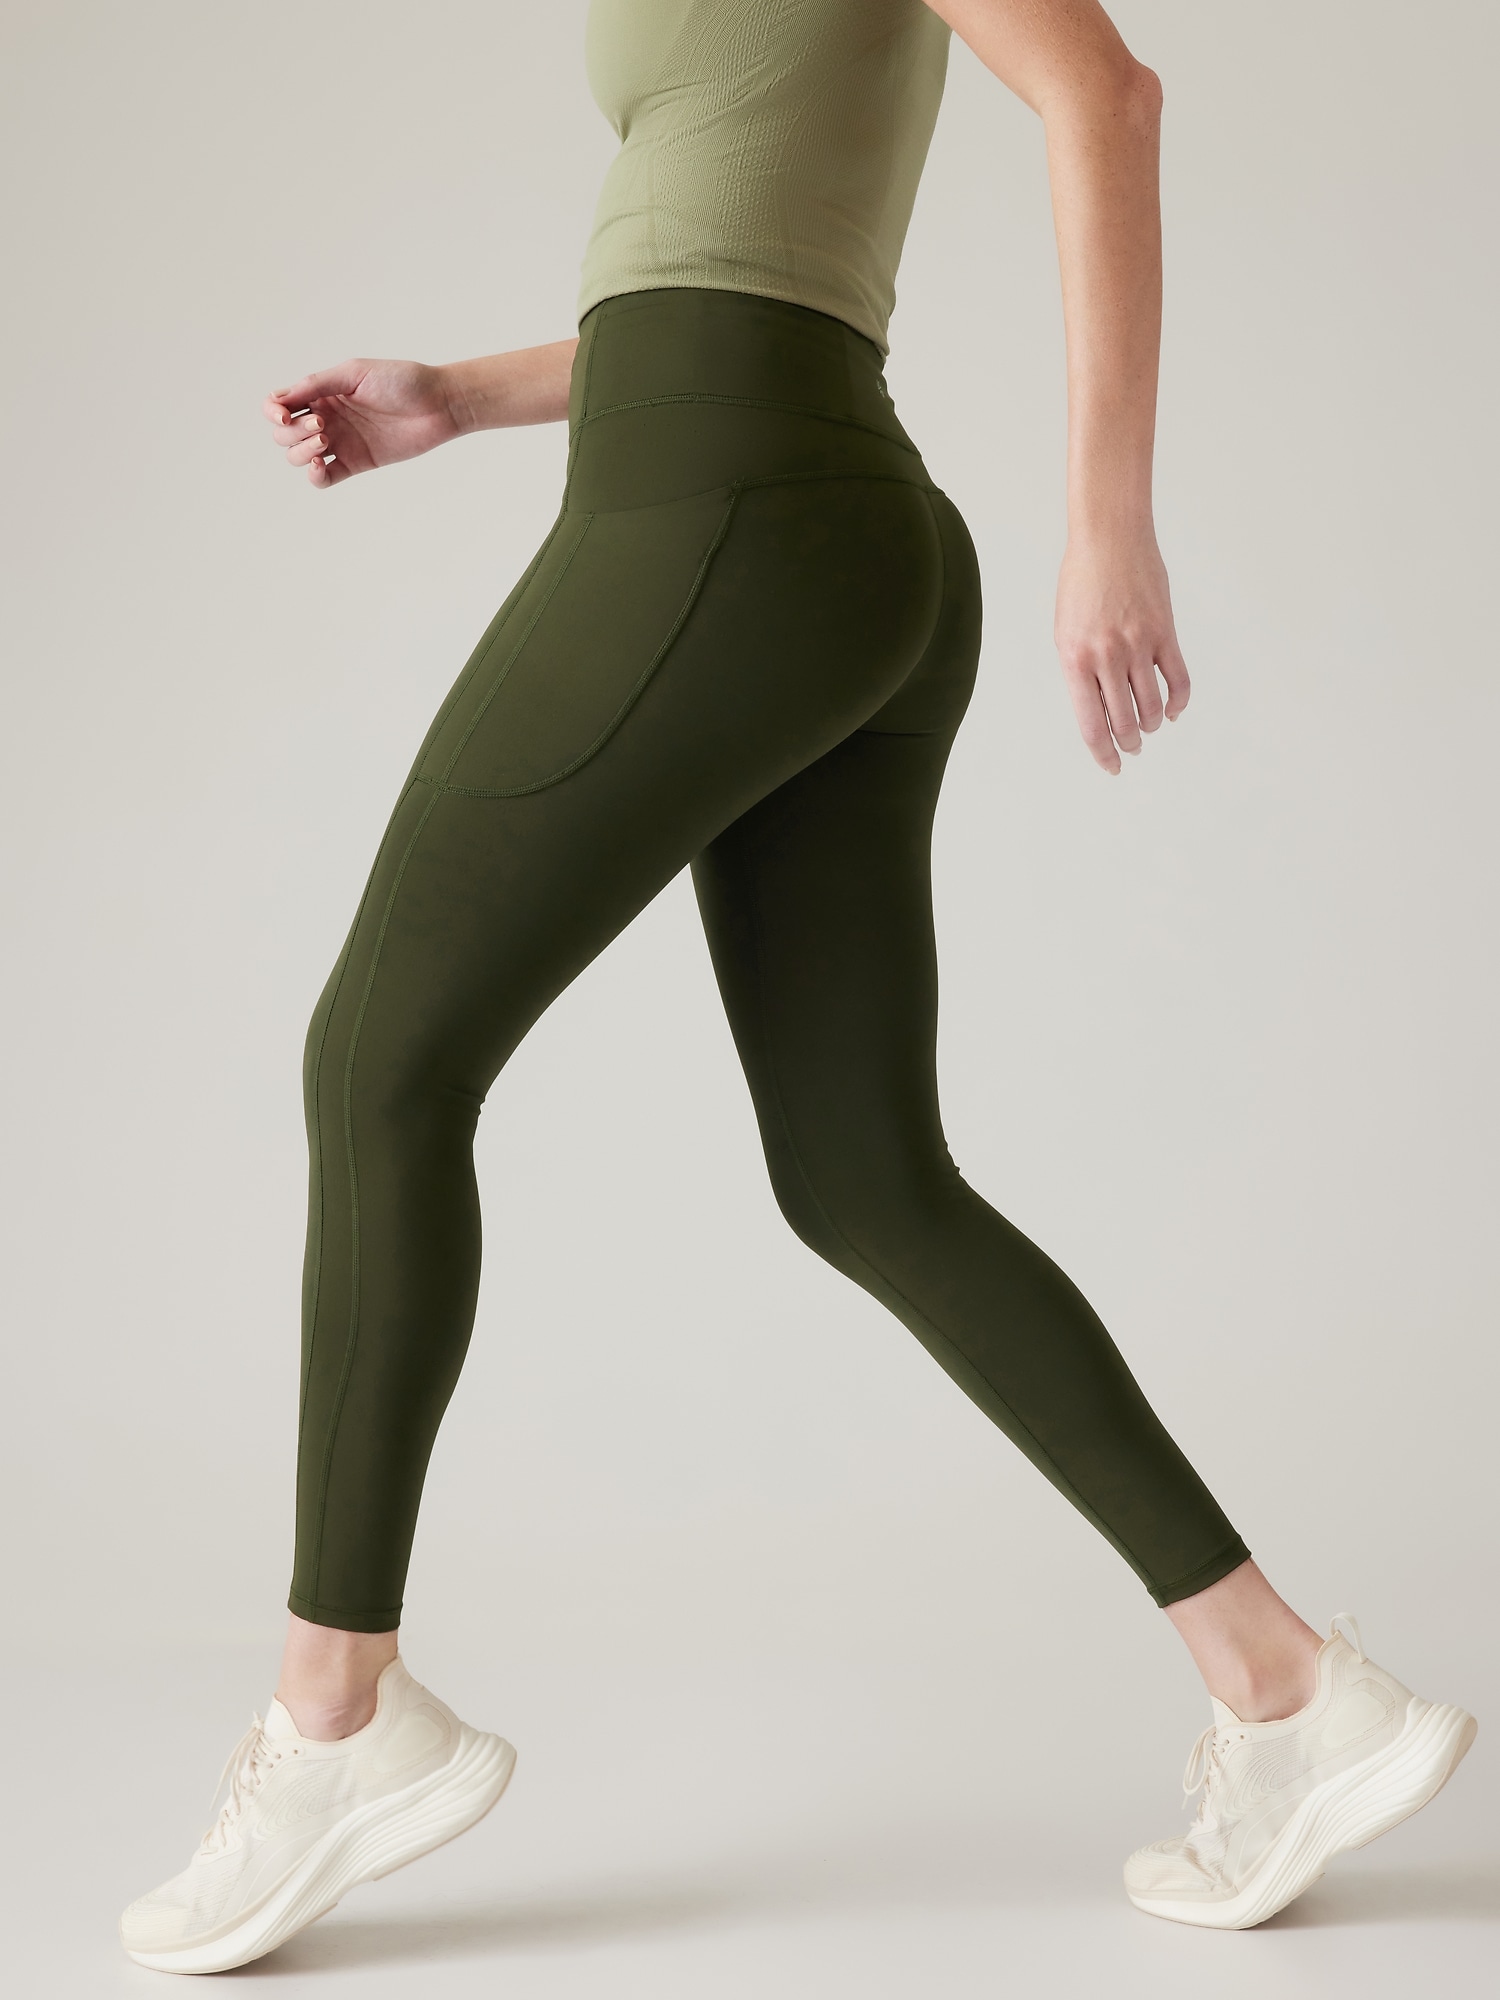 The Athleta x Alicia Keys Collection: Keys Elation Tight, 11 Items We're  Eyeing From the New Athleta x Alicia Keys Collection